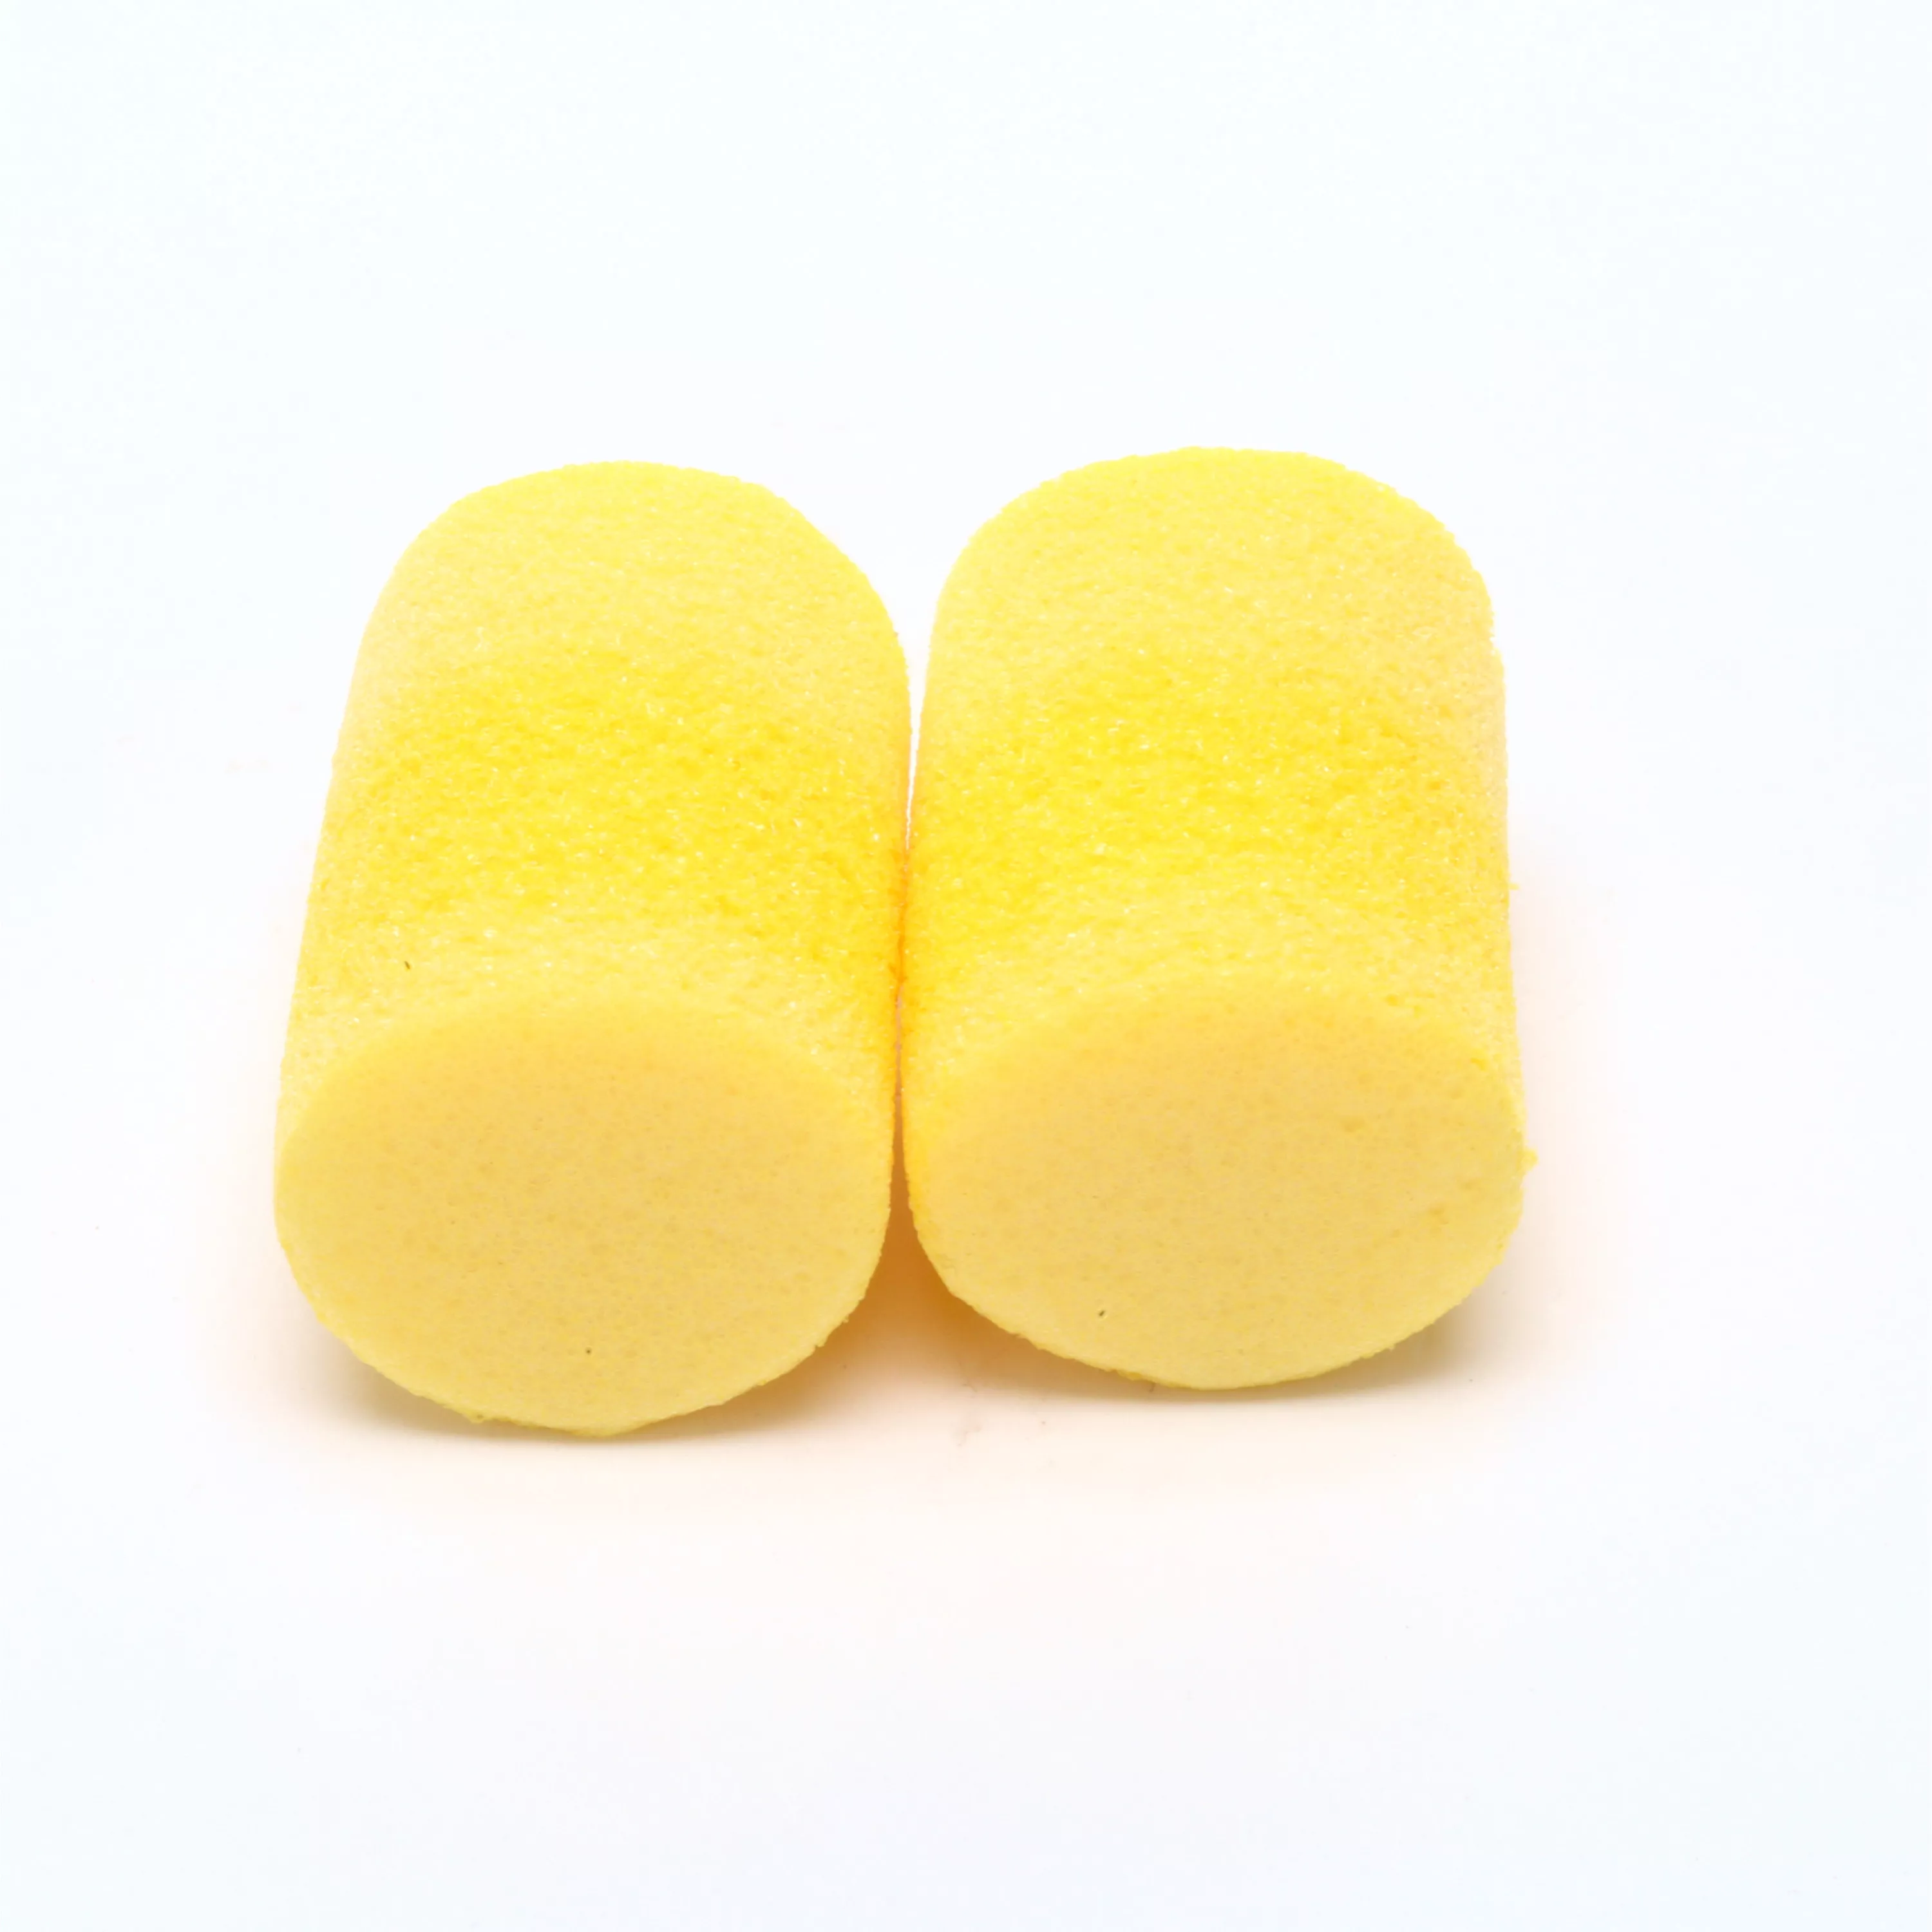 3M™ E-A-R™ Classic™ Earplugs 310-1060, Uncorded, Pillow Pack, 360
Pair/Case